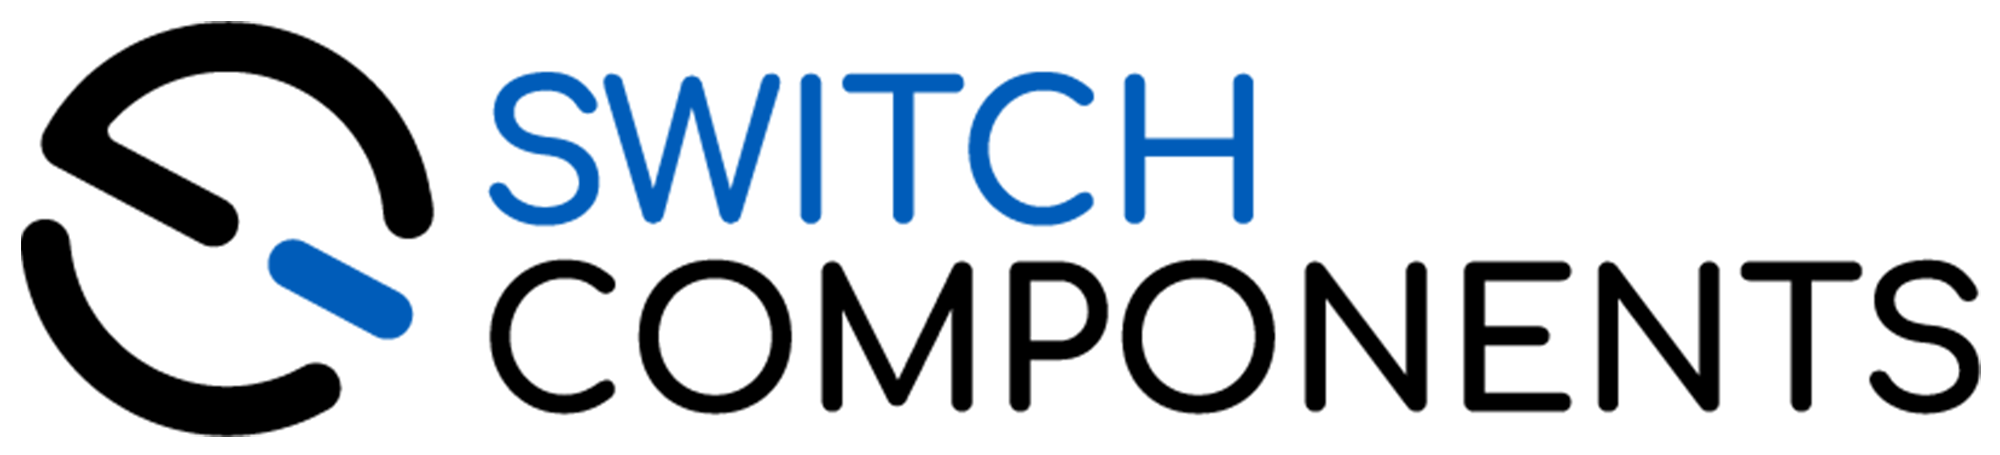 SWITCH COMPONENTS